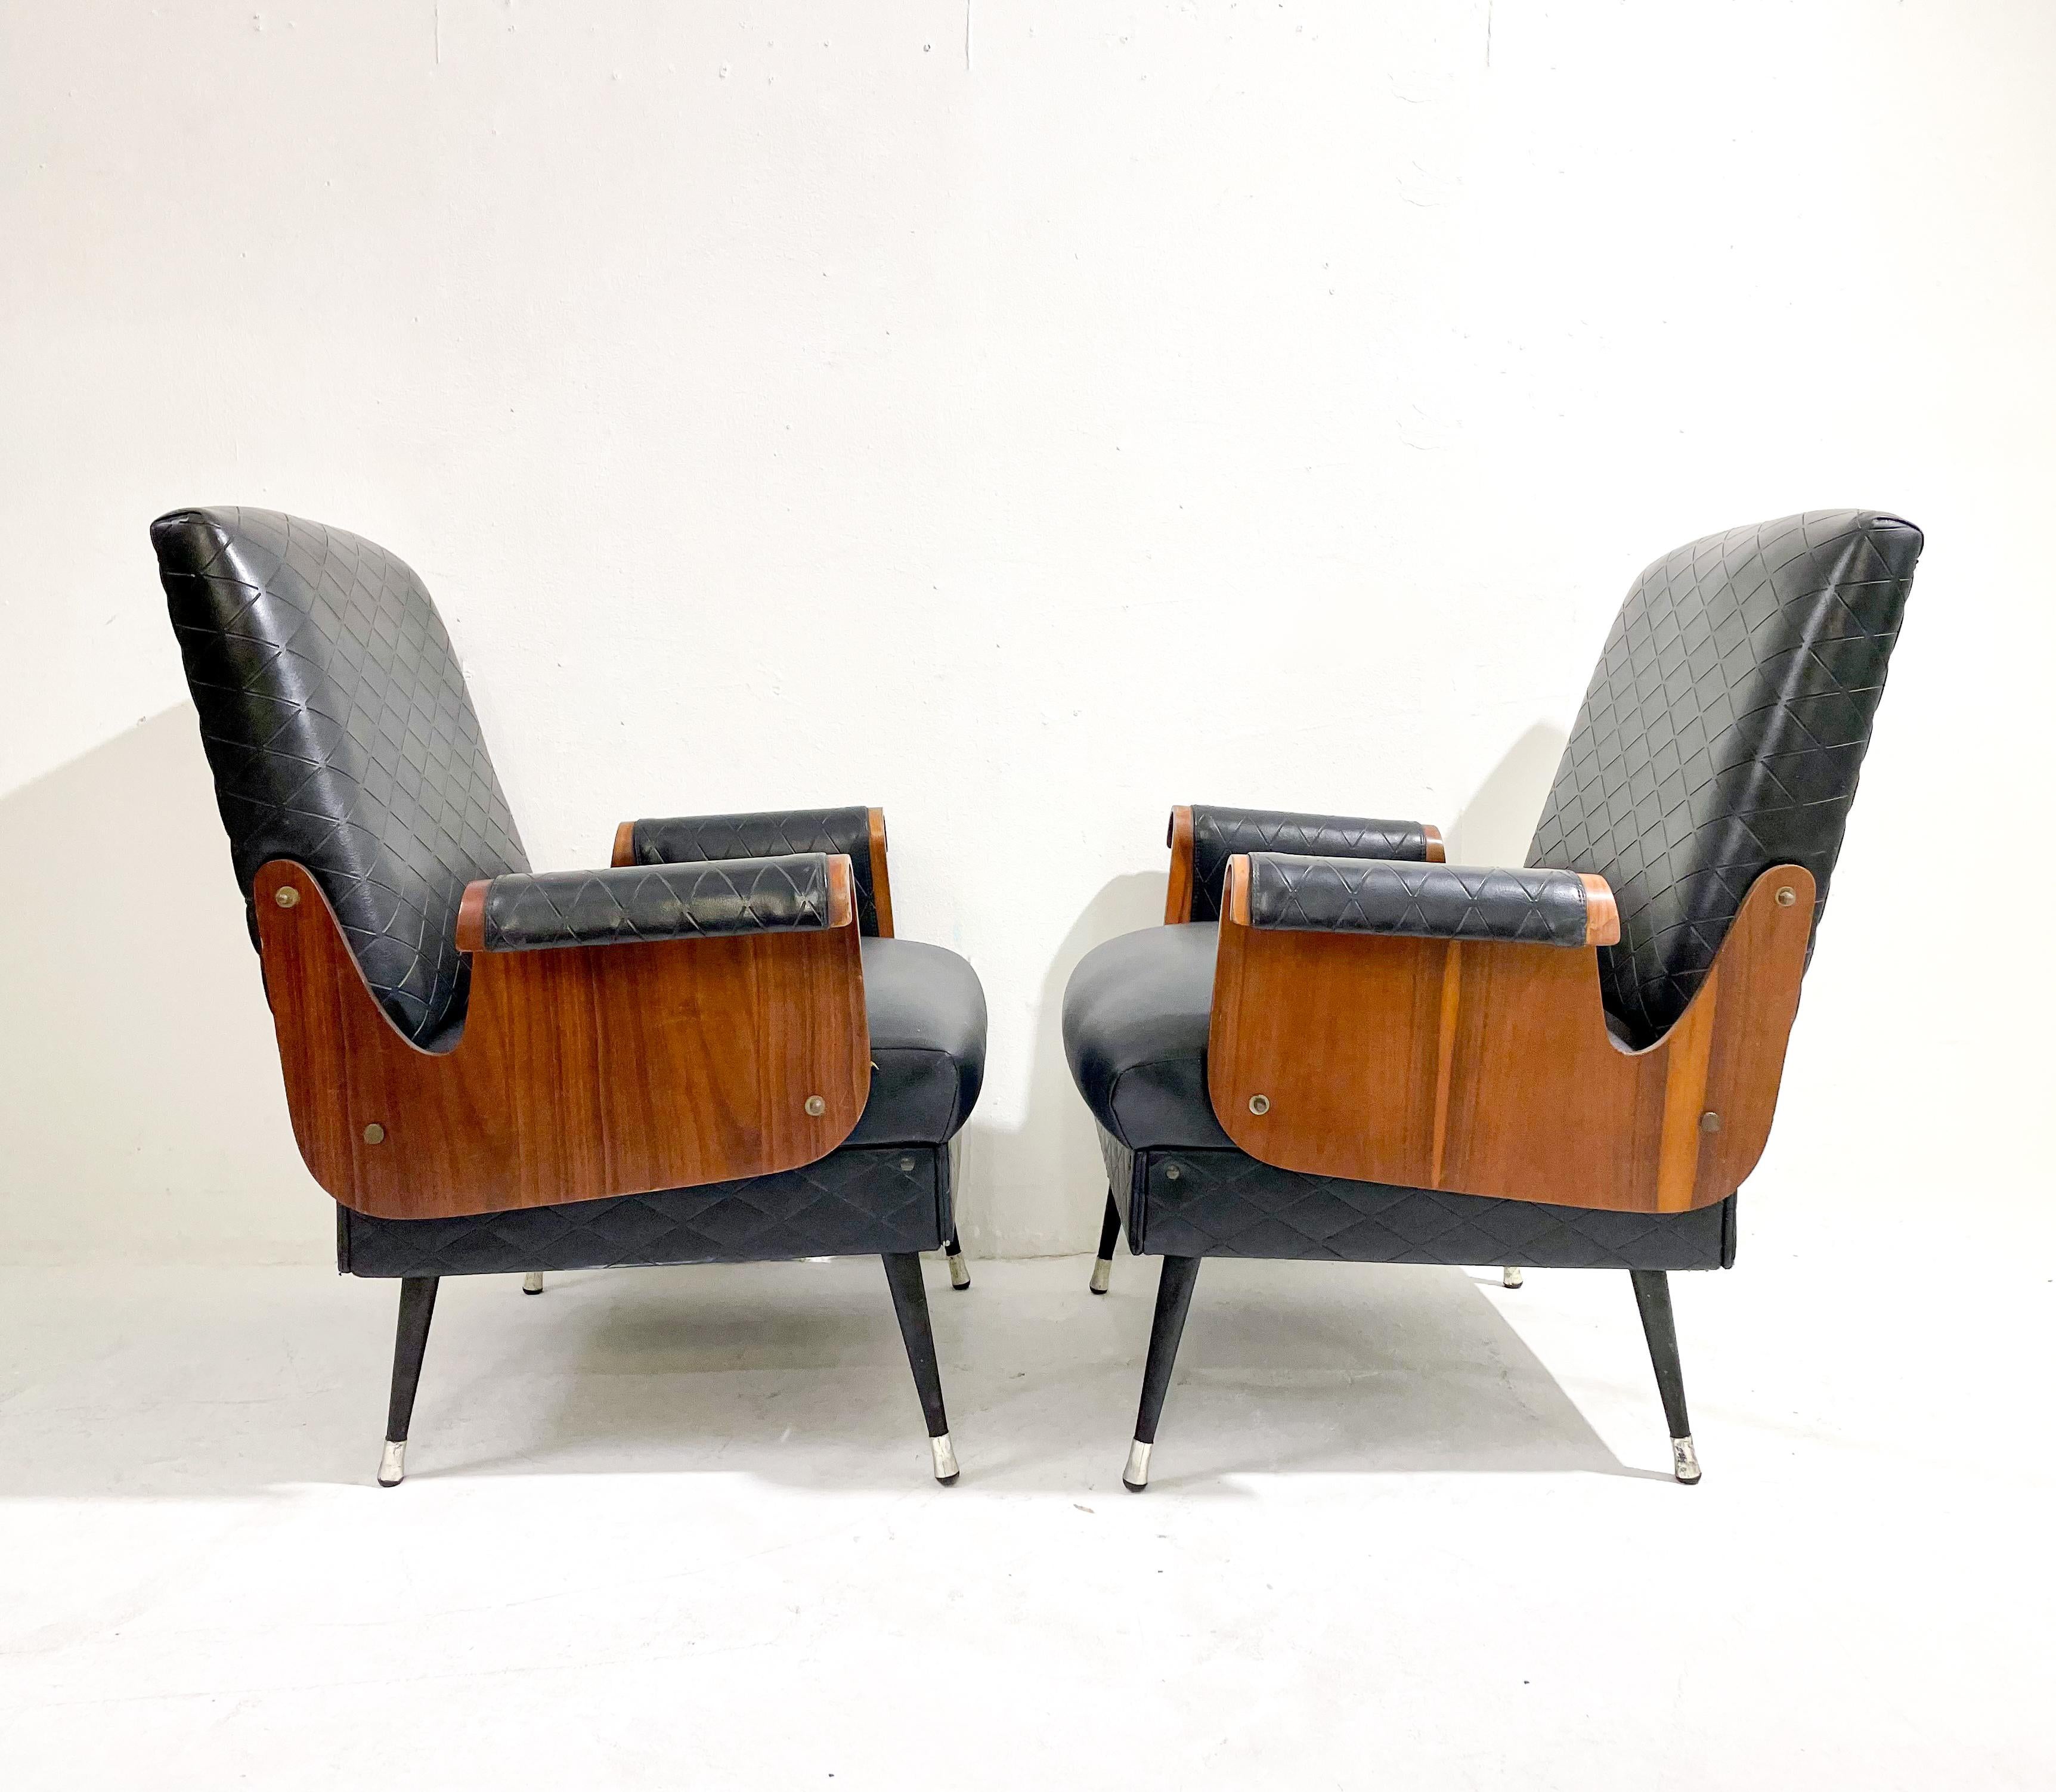 Pair of Mid-Century Modern Armchairs, Walnut and Vegan Leather, Italy, 1960s For Sale 2